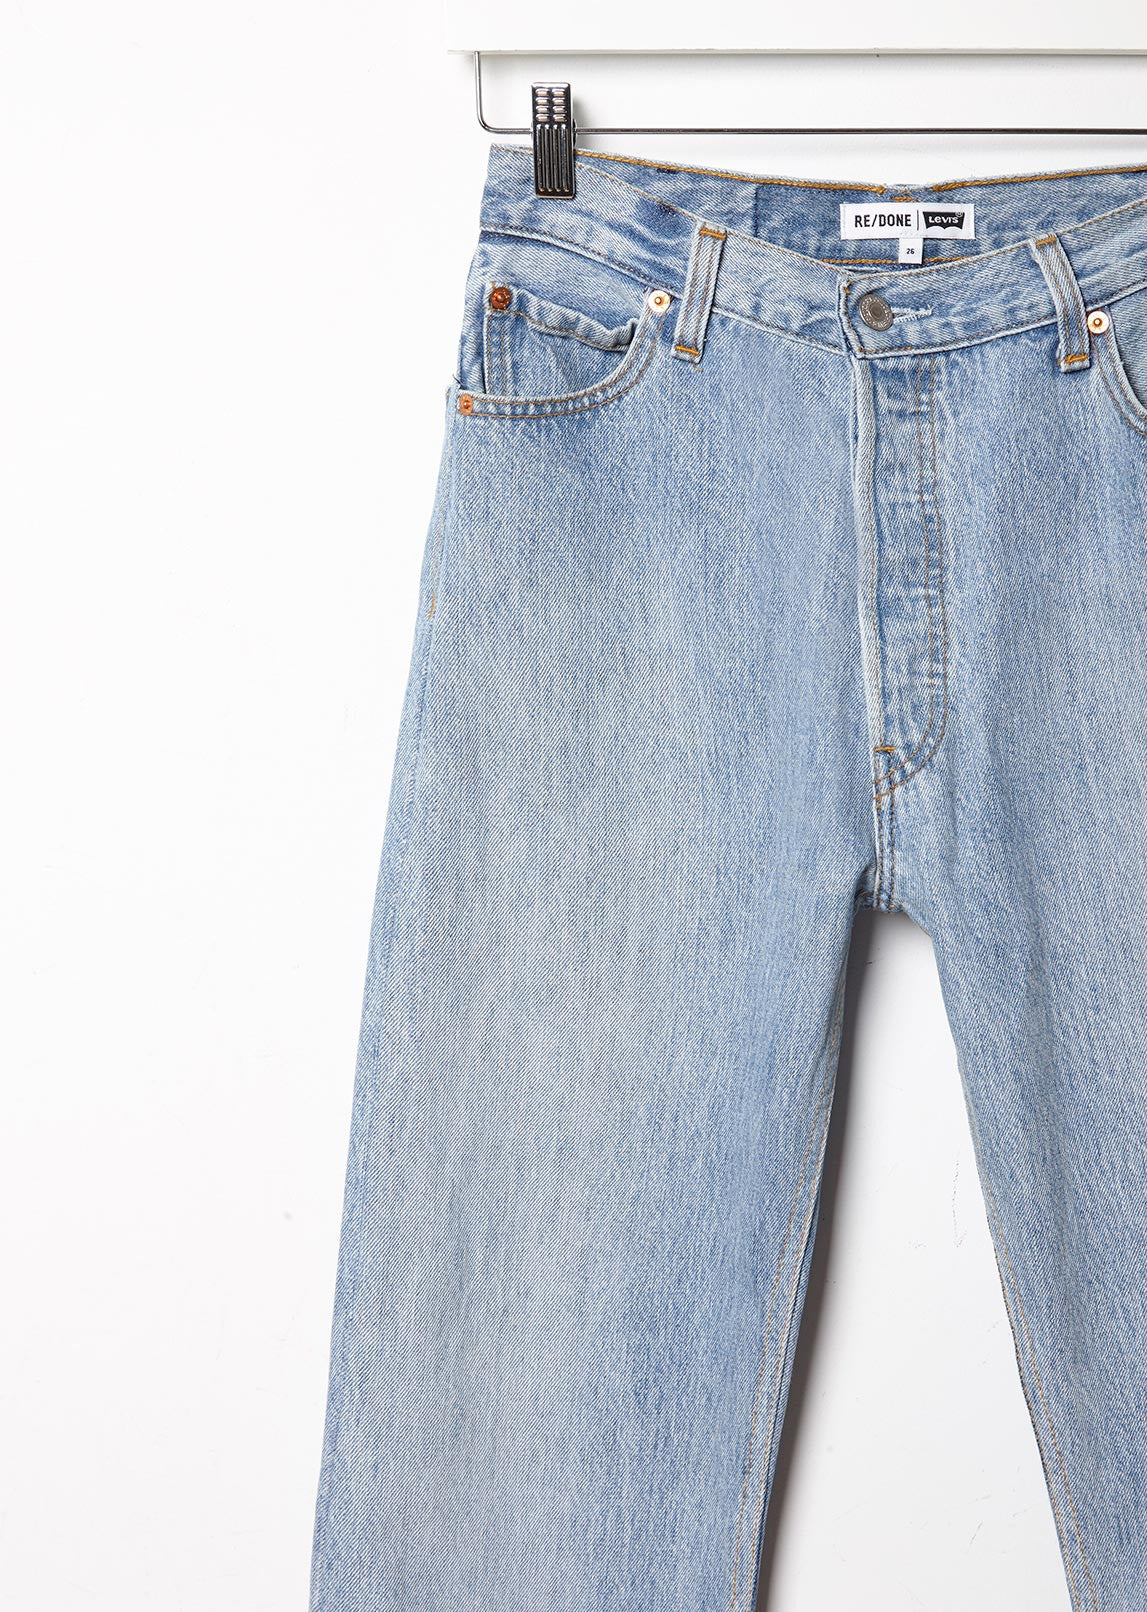 levi's ultra high rise jeans